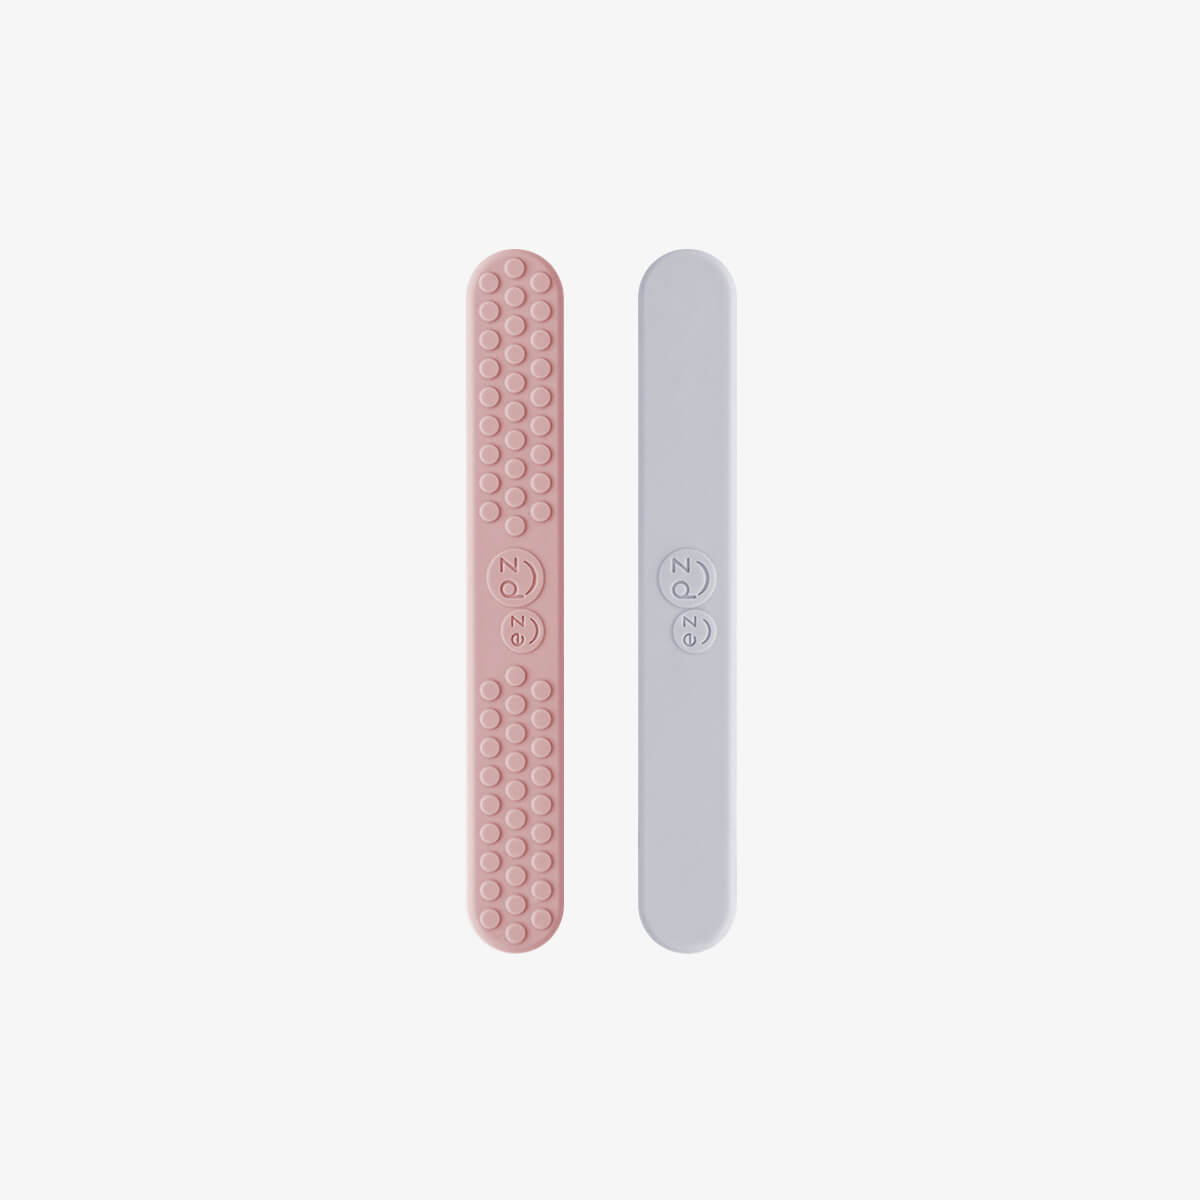 ezpz sensory tongue depressor in blush pink and pewter gray / silicone tongue depressor for babies